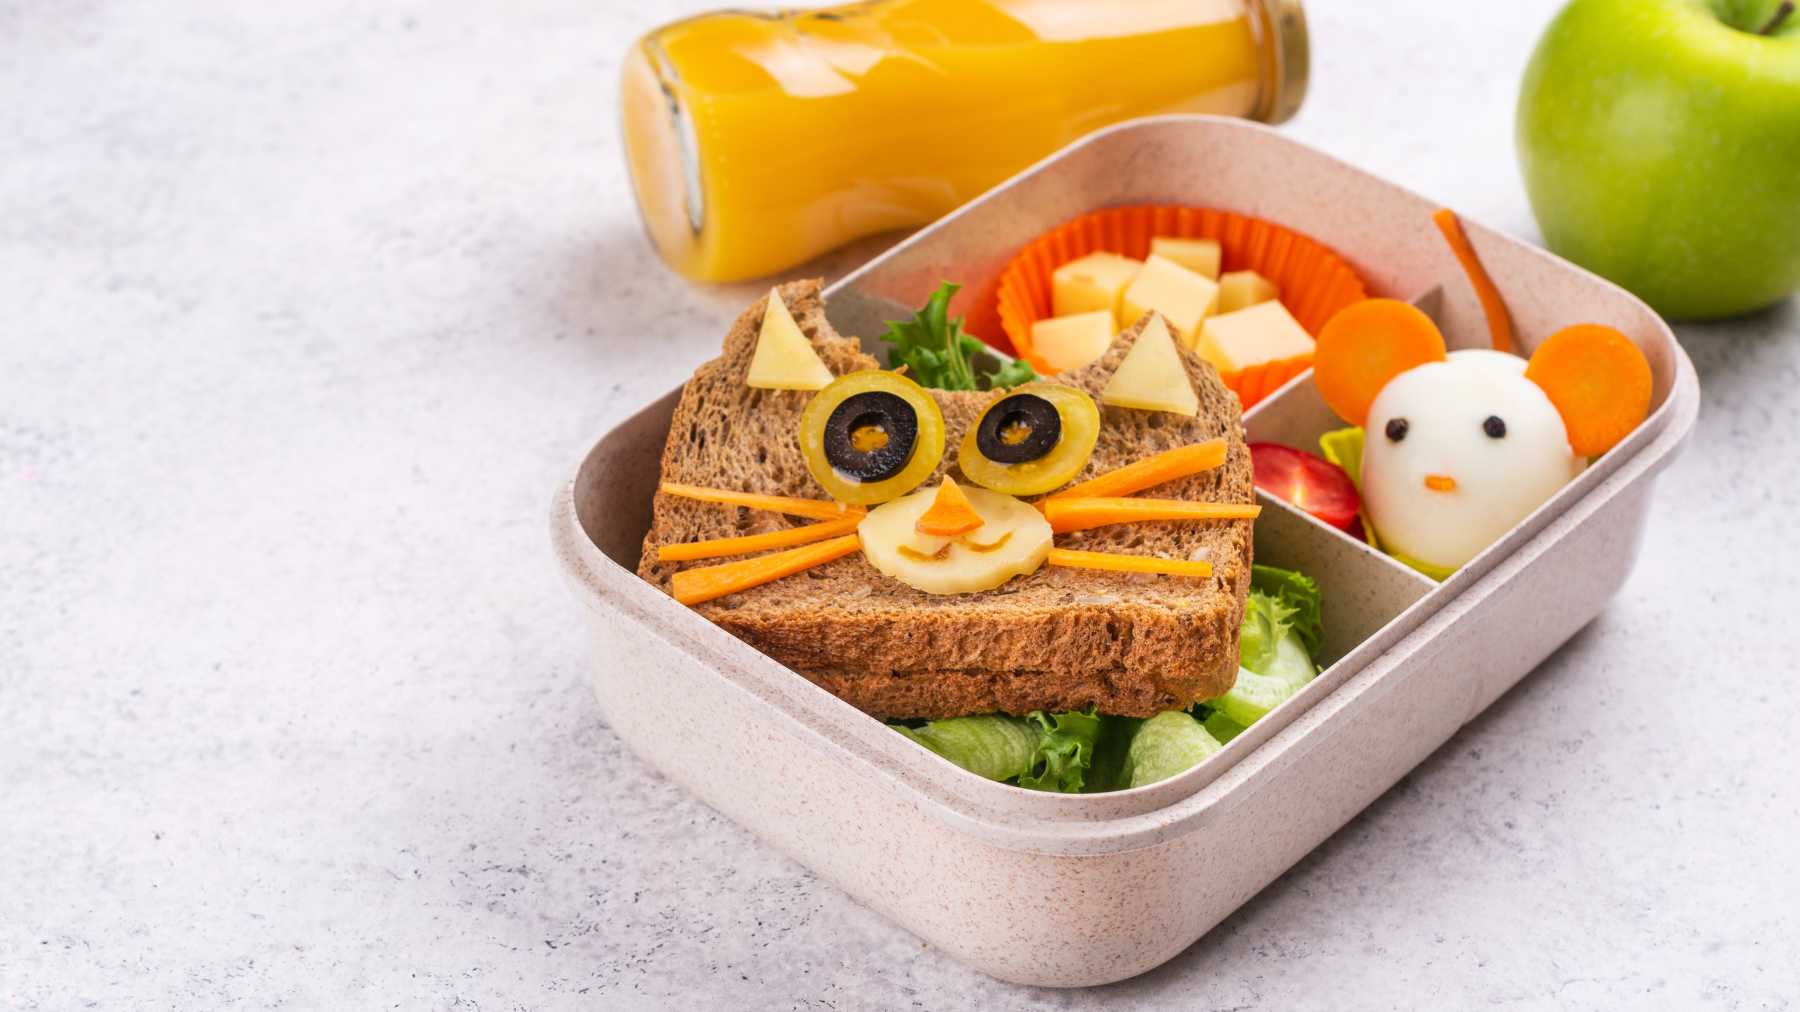 Bento School Lunches : How To Prep & Pack Hot Lunches For School